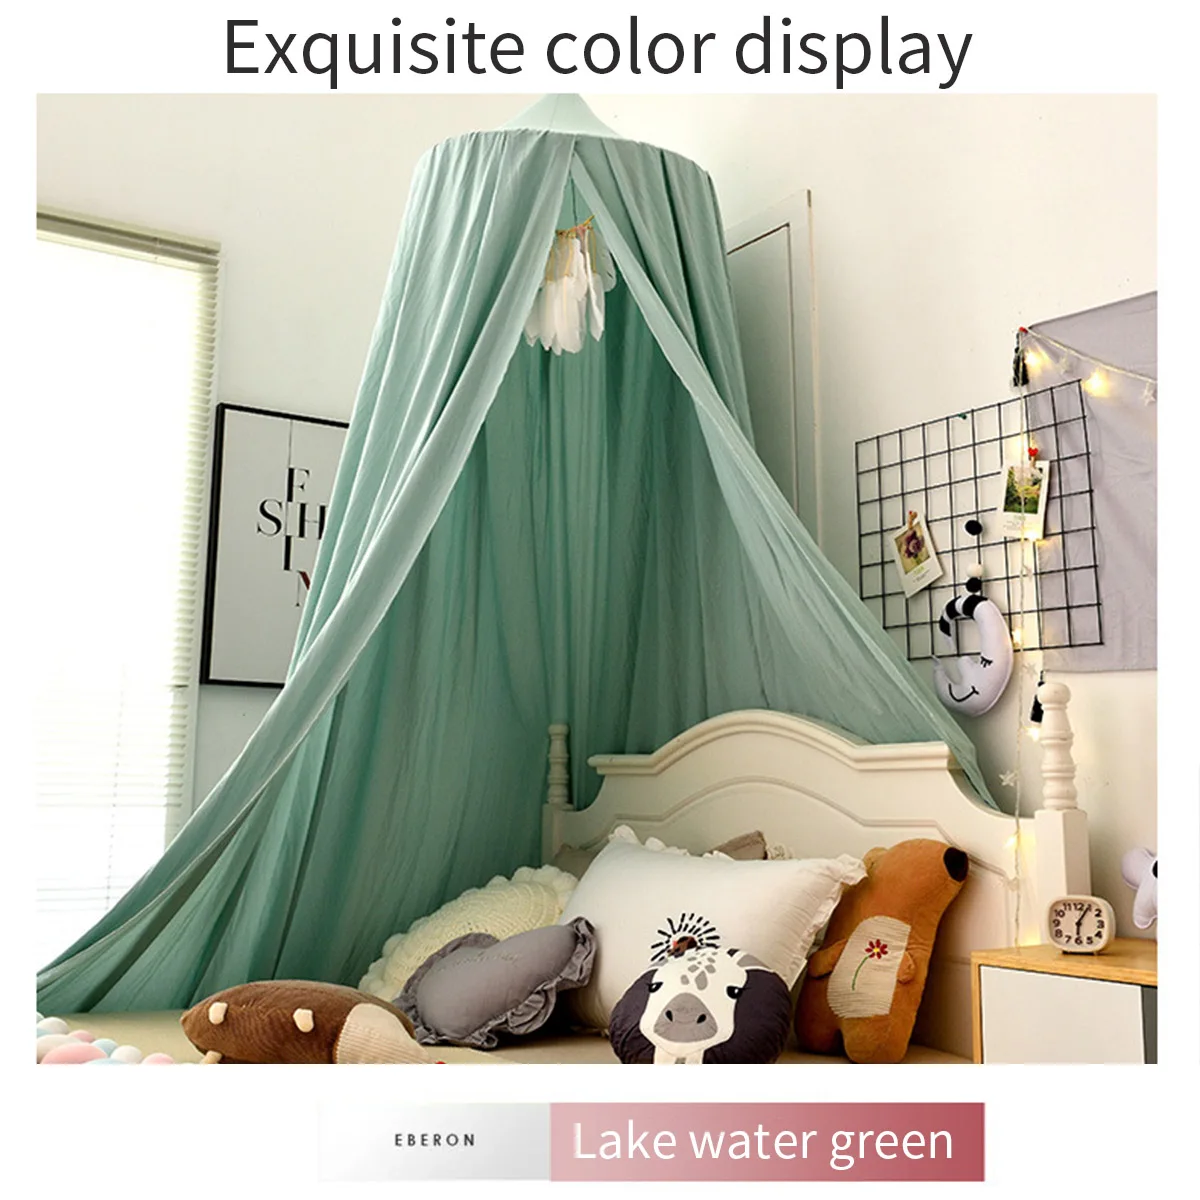 Baby Crib Bed Child Curtain Hung Dome Mosquito Net Boy Tent Room Kids Girl Bedroom Play Living Beding